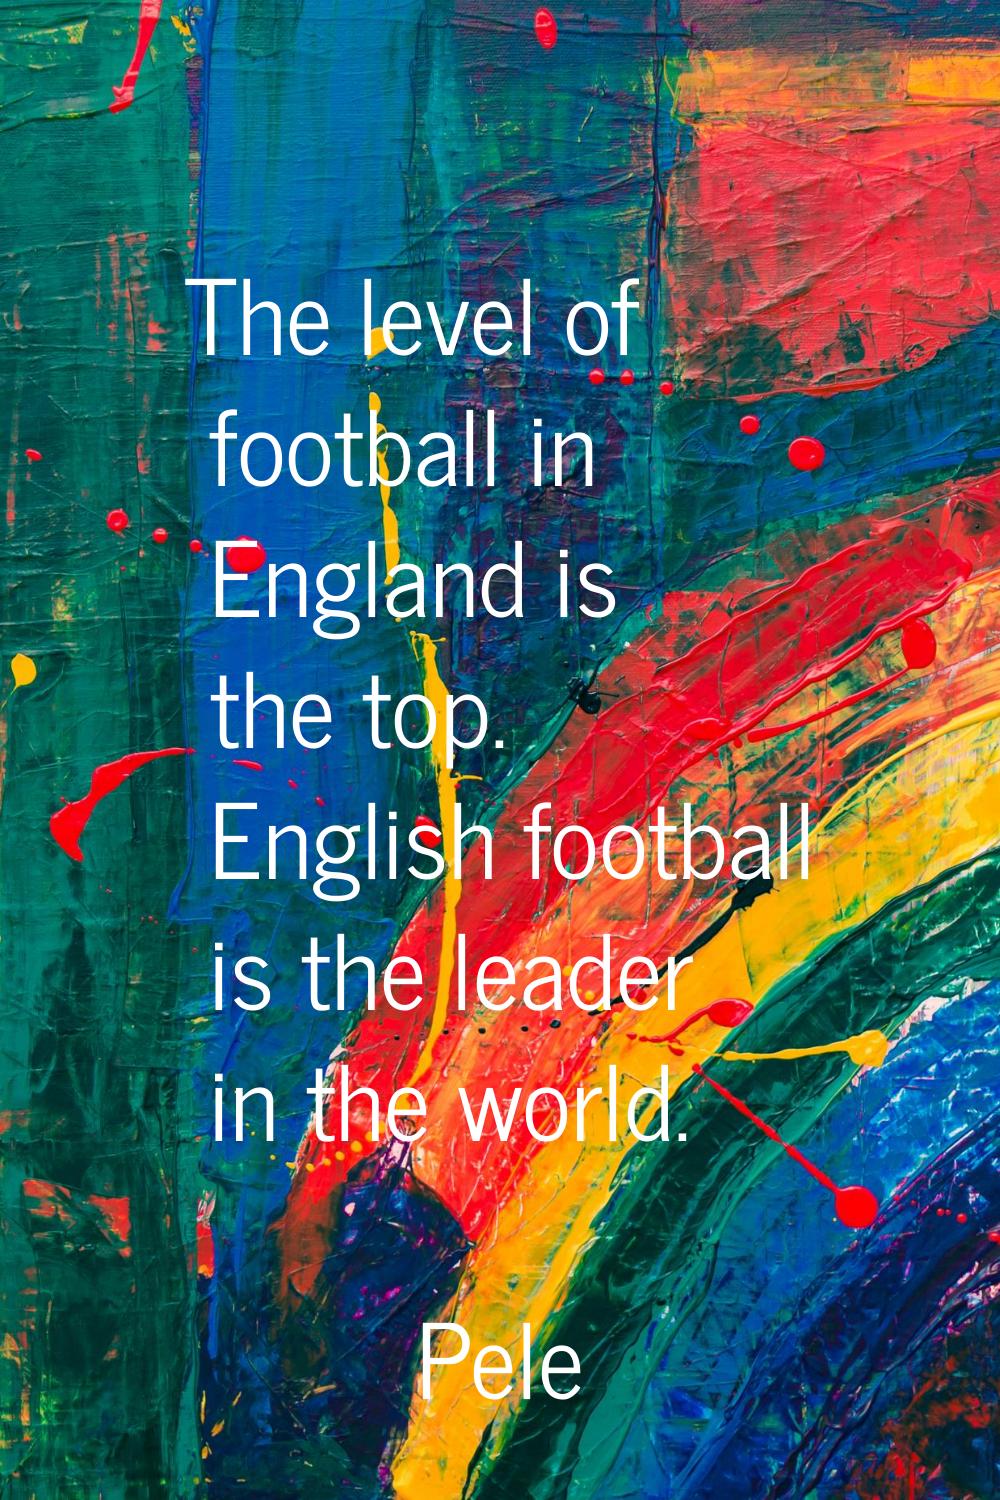 The level of football in England is the top. English football is the leader in the world.